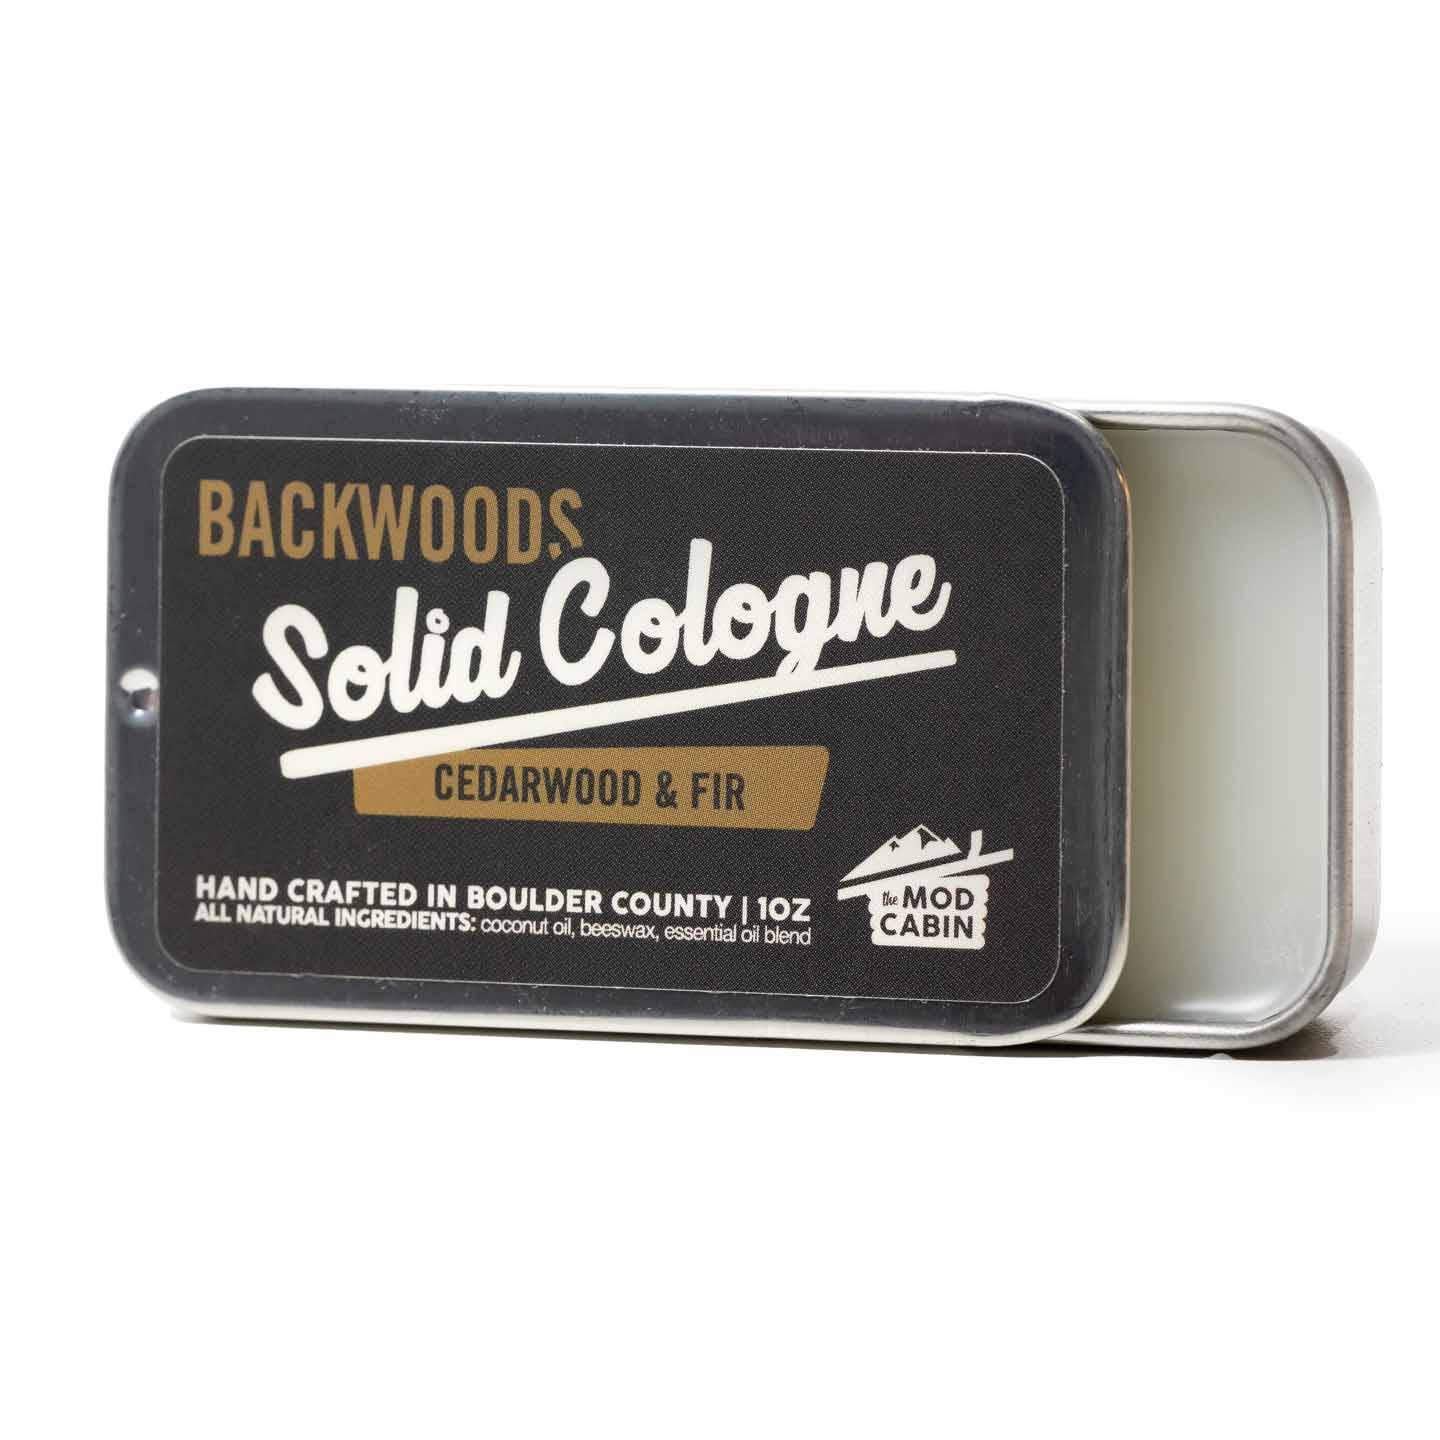 Solid Cologne - Backwoods - by The Mod Cabin